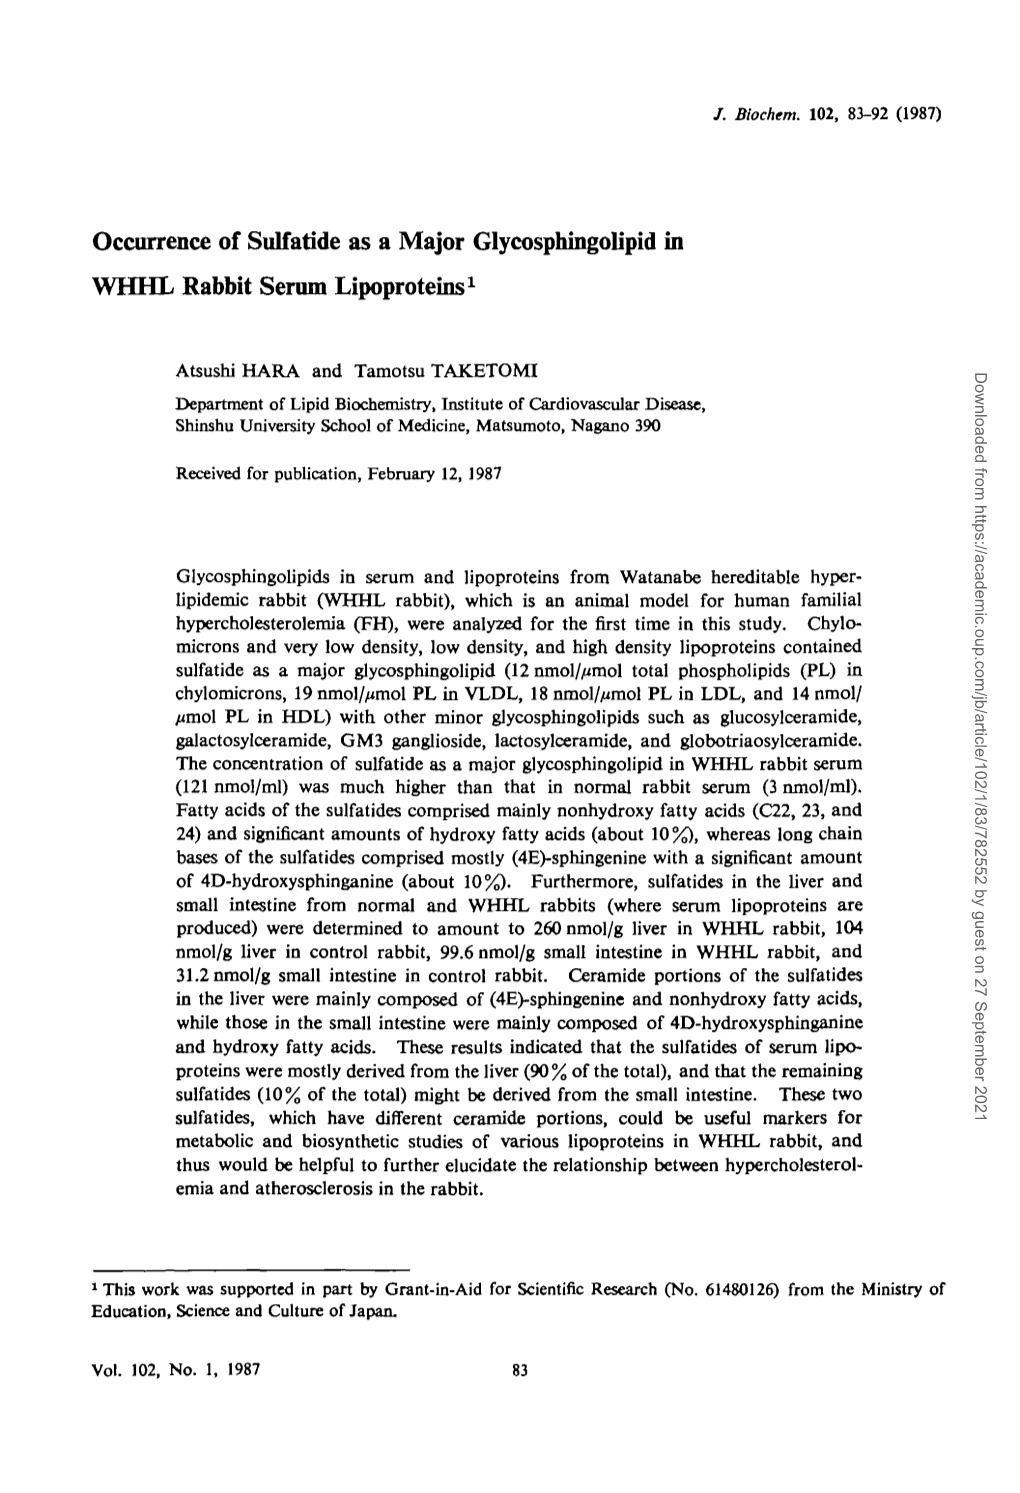 Occurrence of Sulfatide As a Major Glycosphingolipid in WHHL Rabbit Serum Lipoproteins1